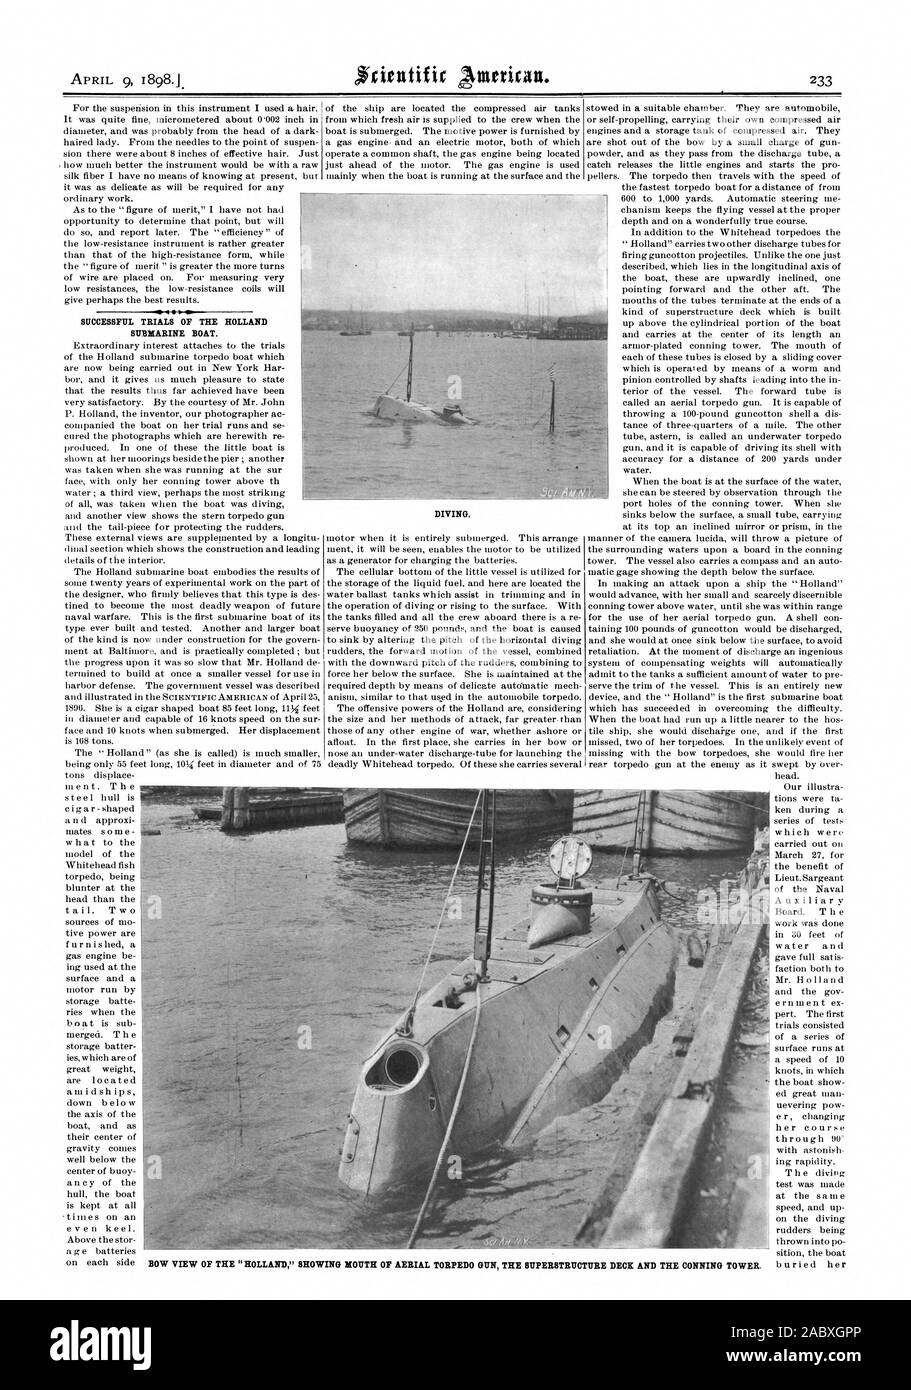 SUCCESSFUL TRIALS OF THE HOLLAND SUBMARINE BOAT. DIVING., scientific american, 1898-04-09 Stock Photo